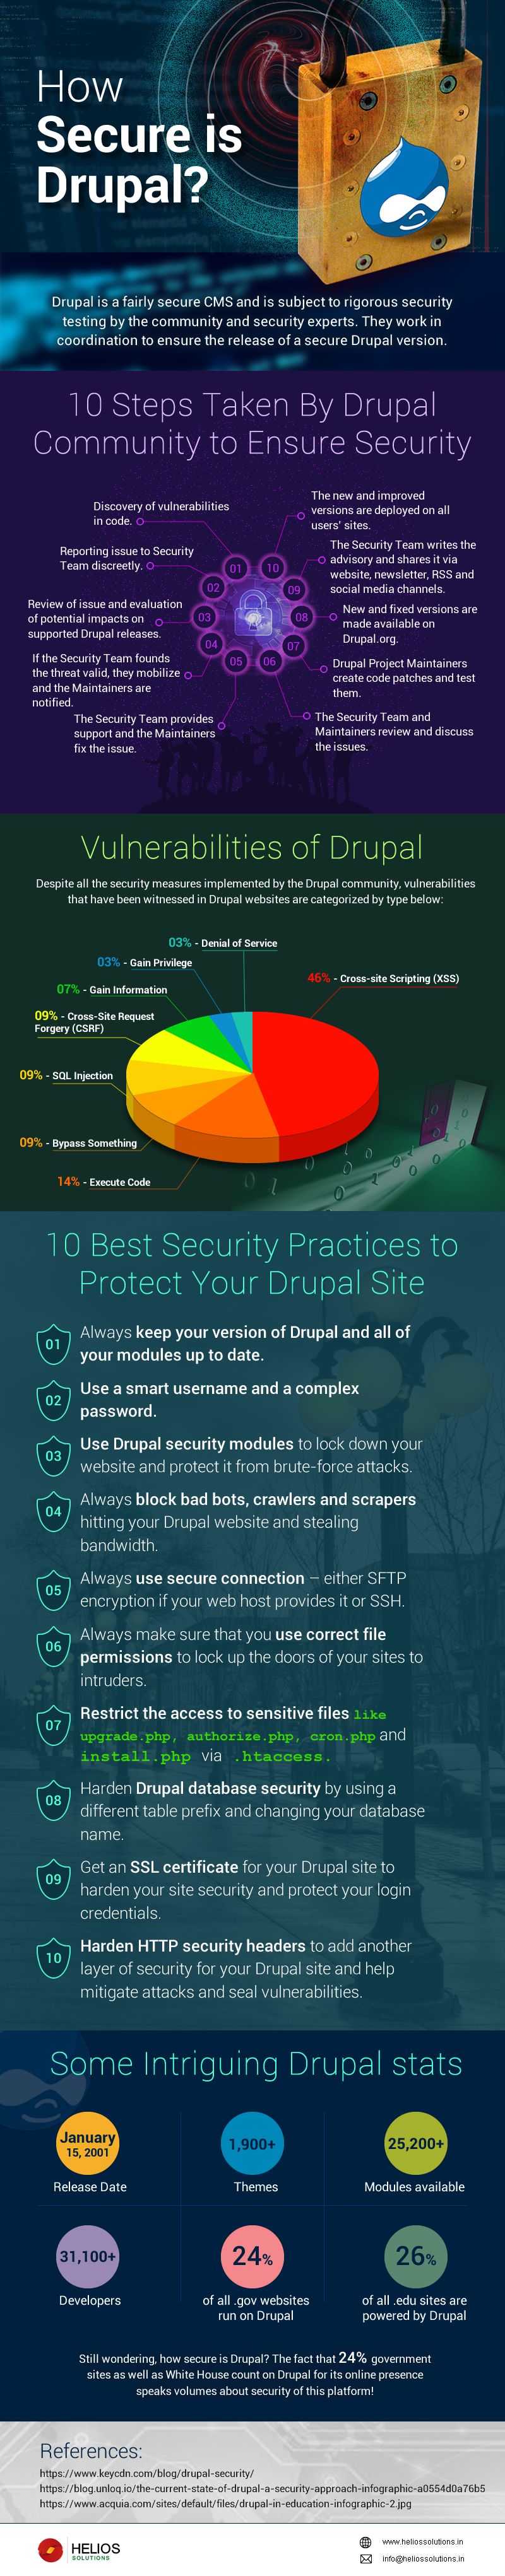 How-Secure-is-Drupal